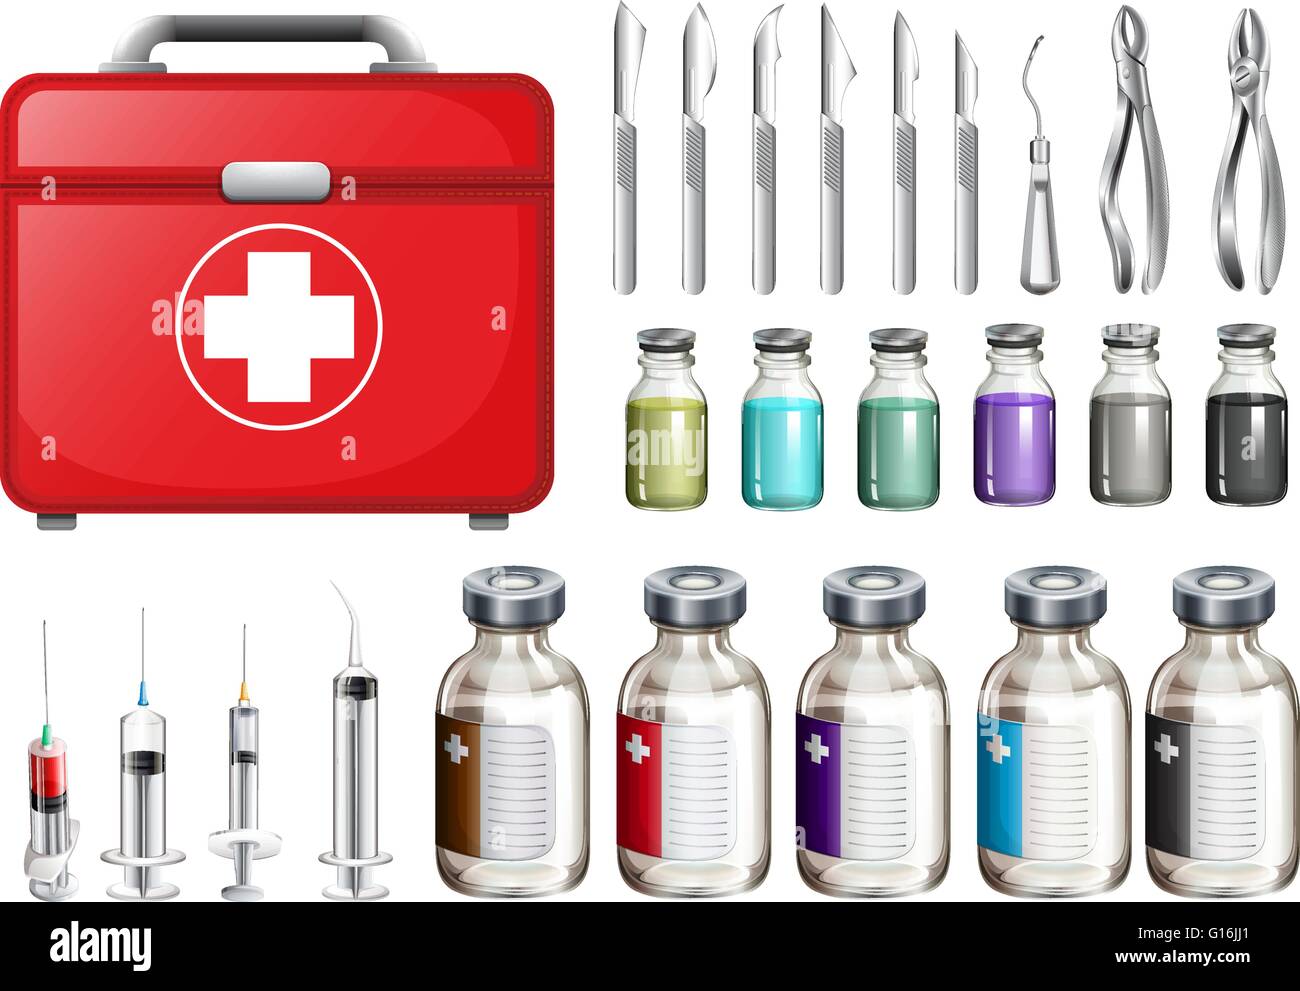 Medical equiments and firstaid box illustration Stock Vector